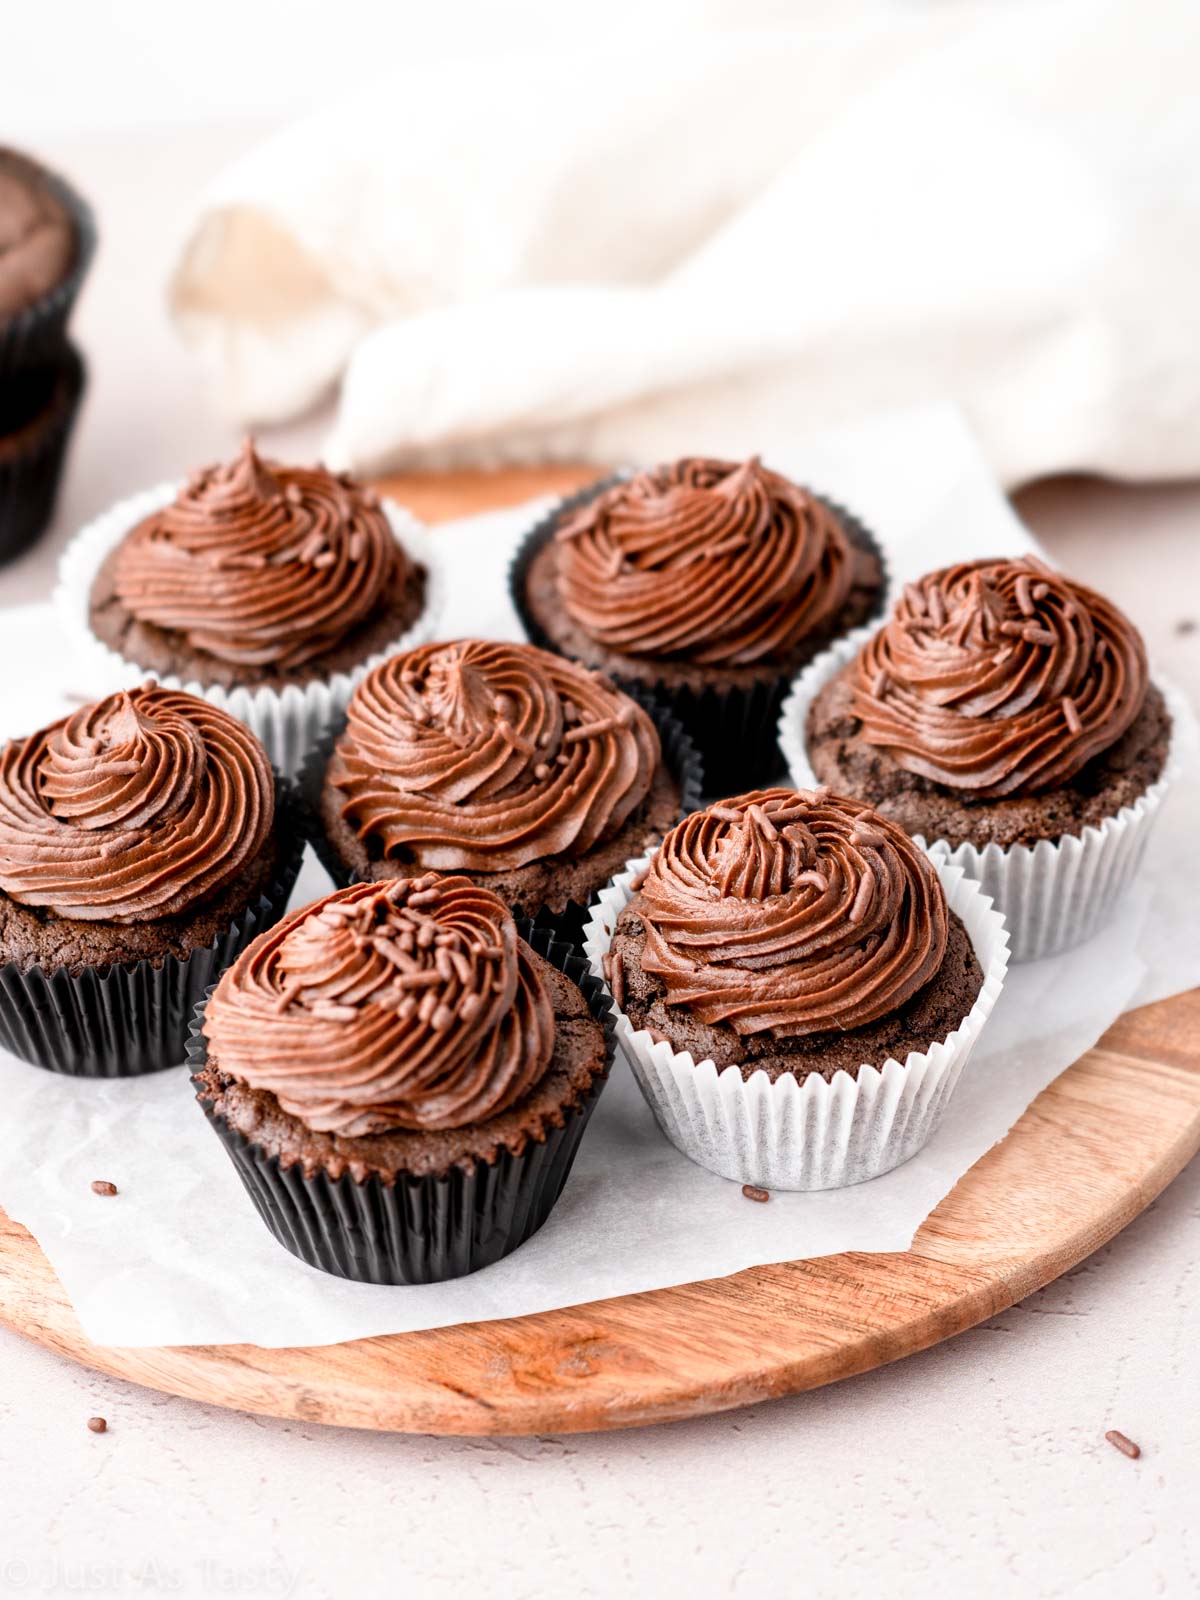 Frosted gluten free chocolate cupcakes.